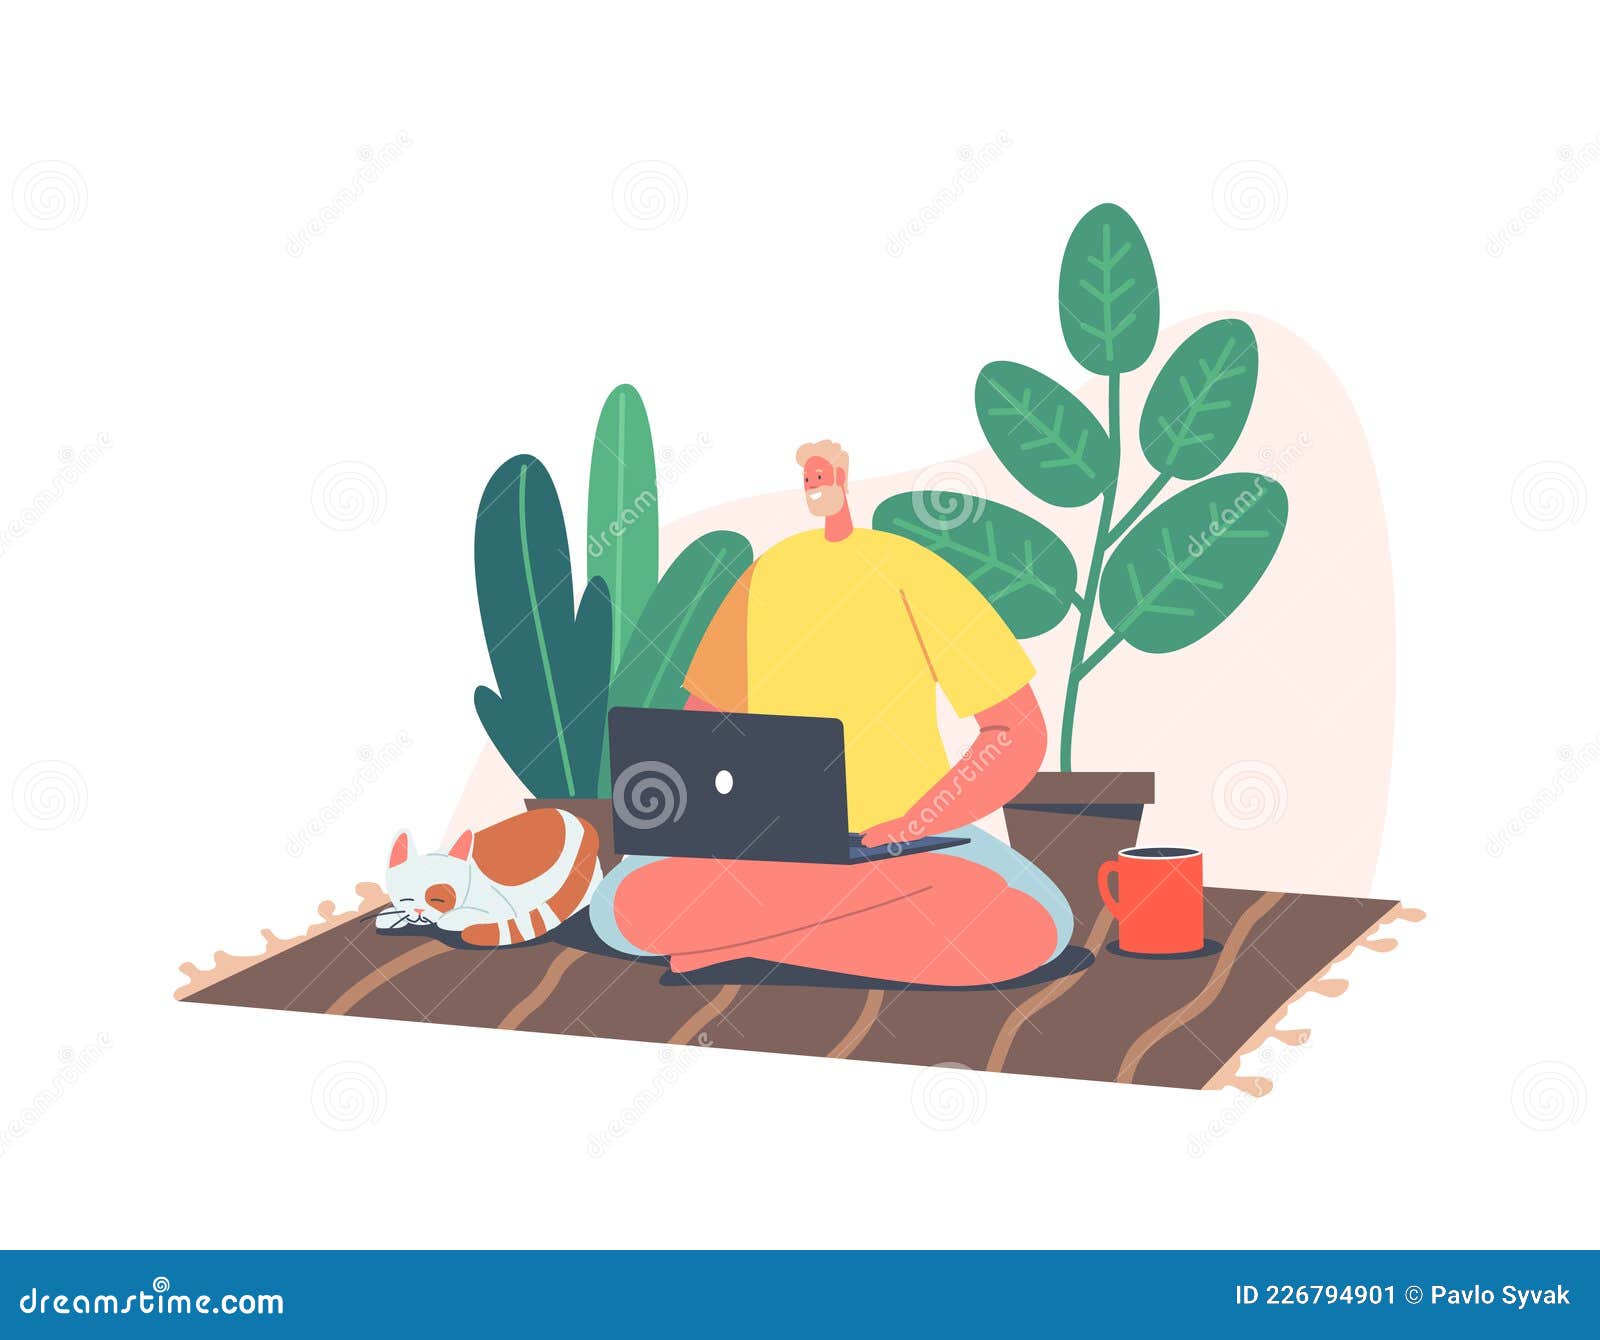 remote freelance work, homeworking place concept. man freelancer sitting on floor in yoga pose with cat and coffee cup